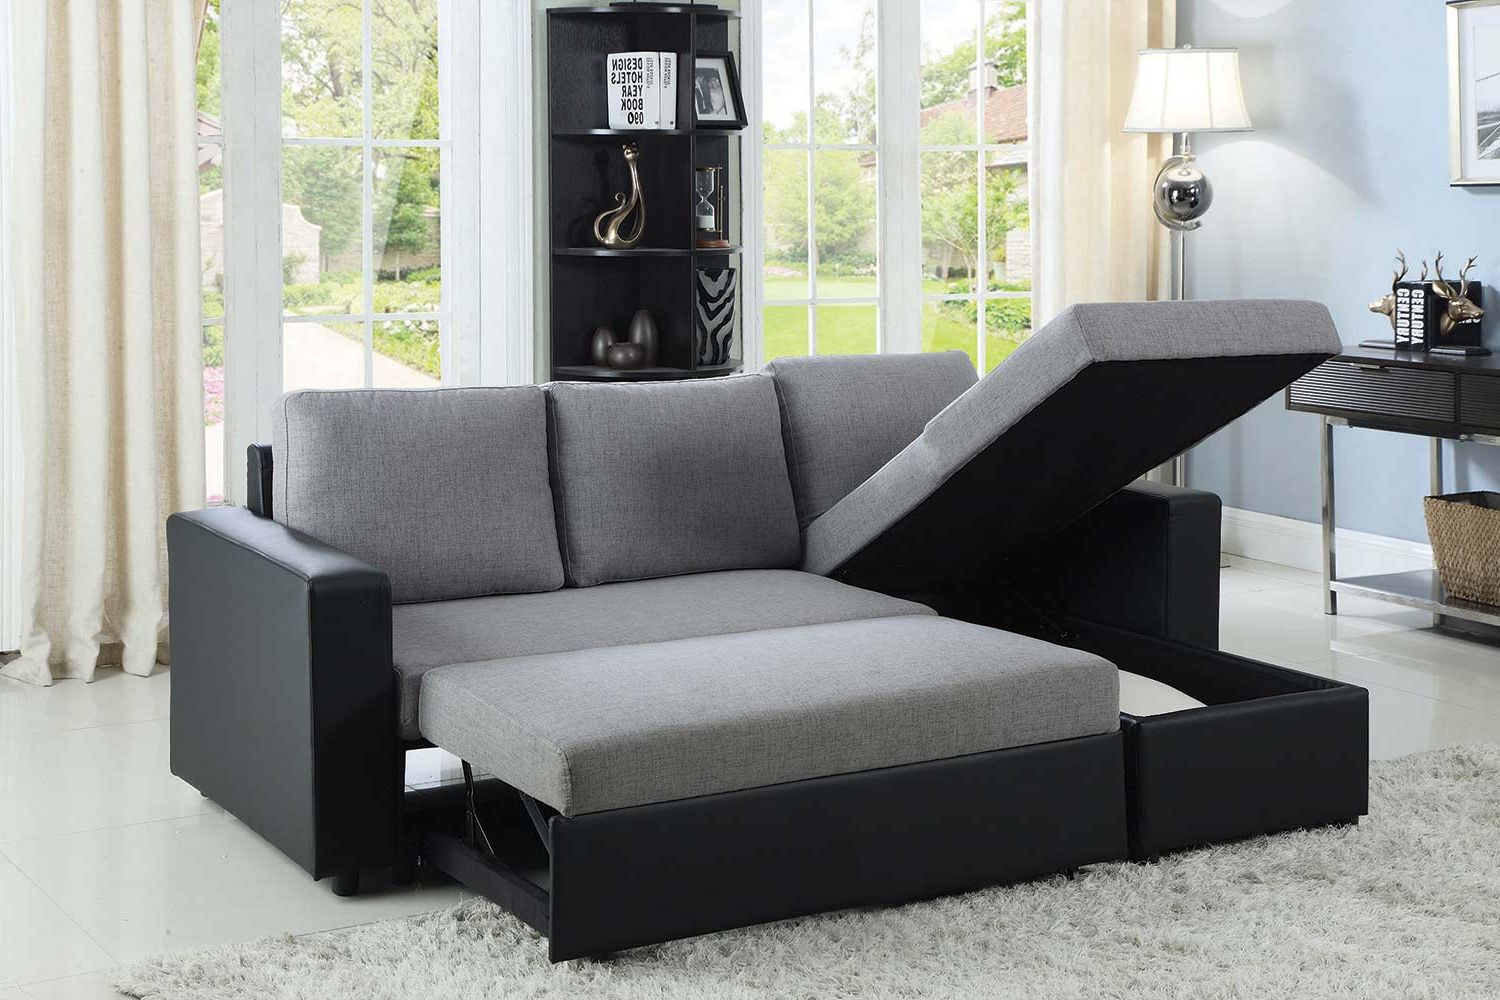 Newest Felton Modern Style Pullout Sleeper Sofas Black With Regard To Coaster Baylor Sectional Sofa – Grey/black 503929 At (View 3 of 20)